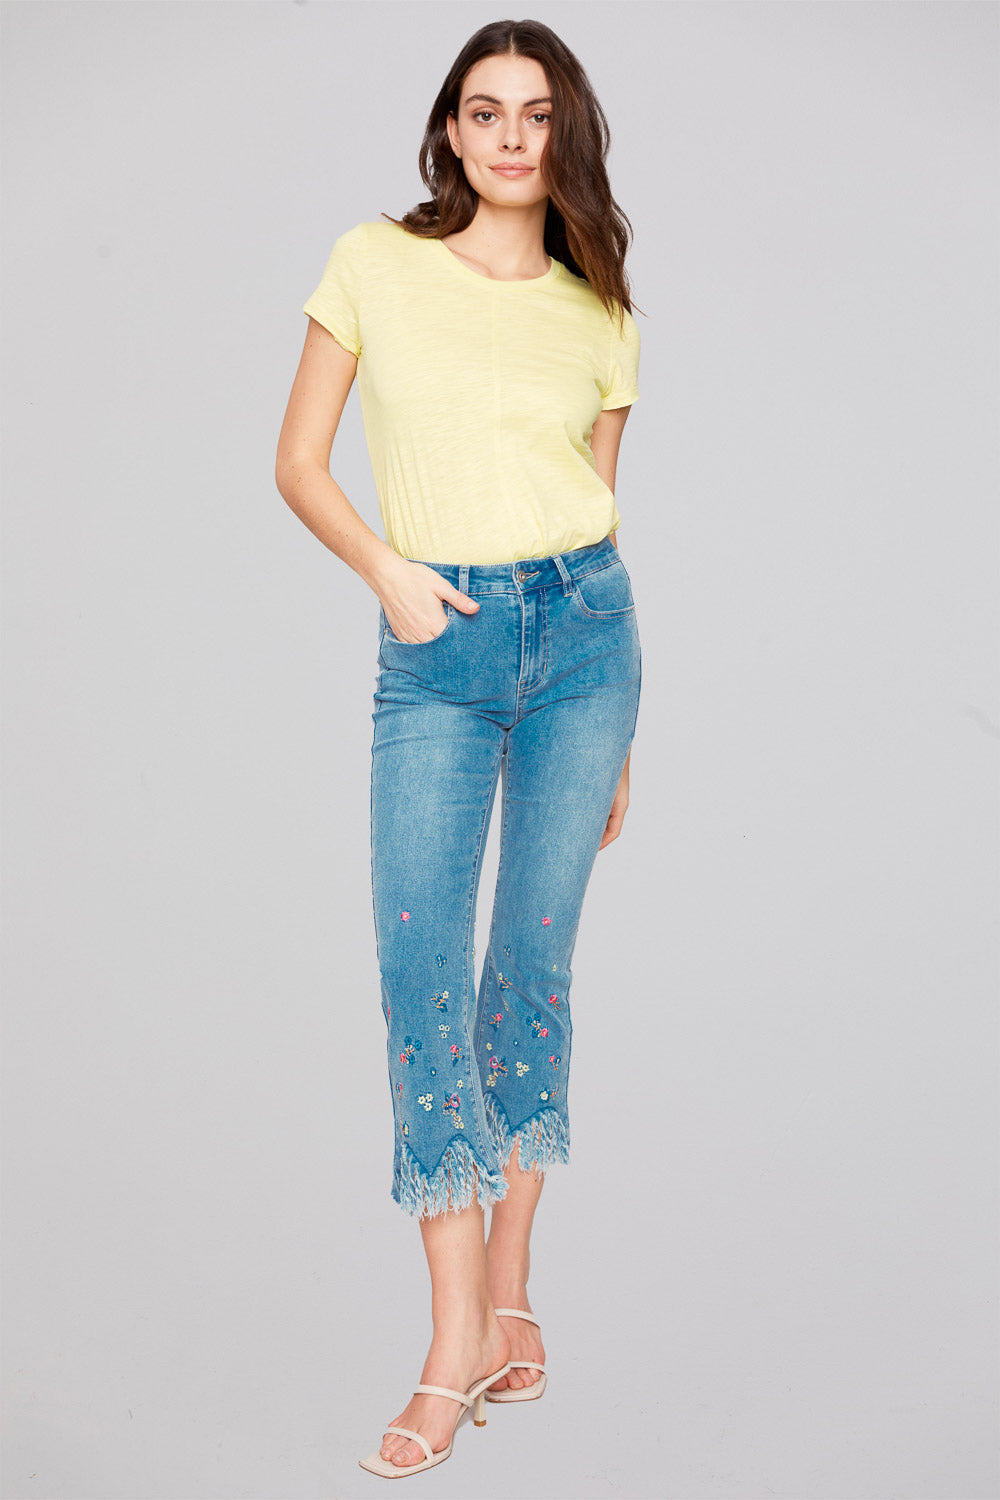 CharlieB-Floral-Embroidered-Jeans-LightBlue